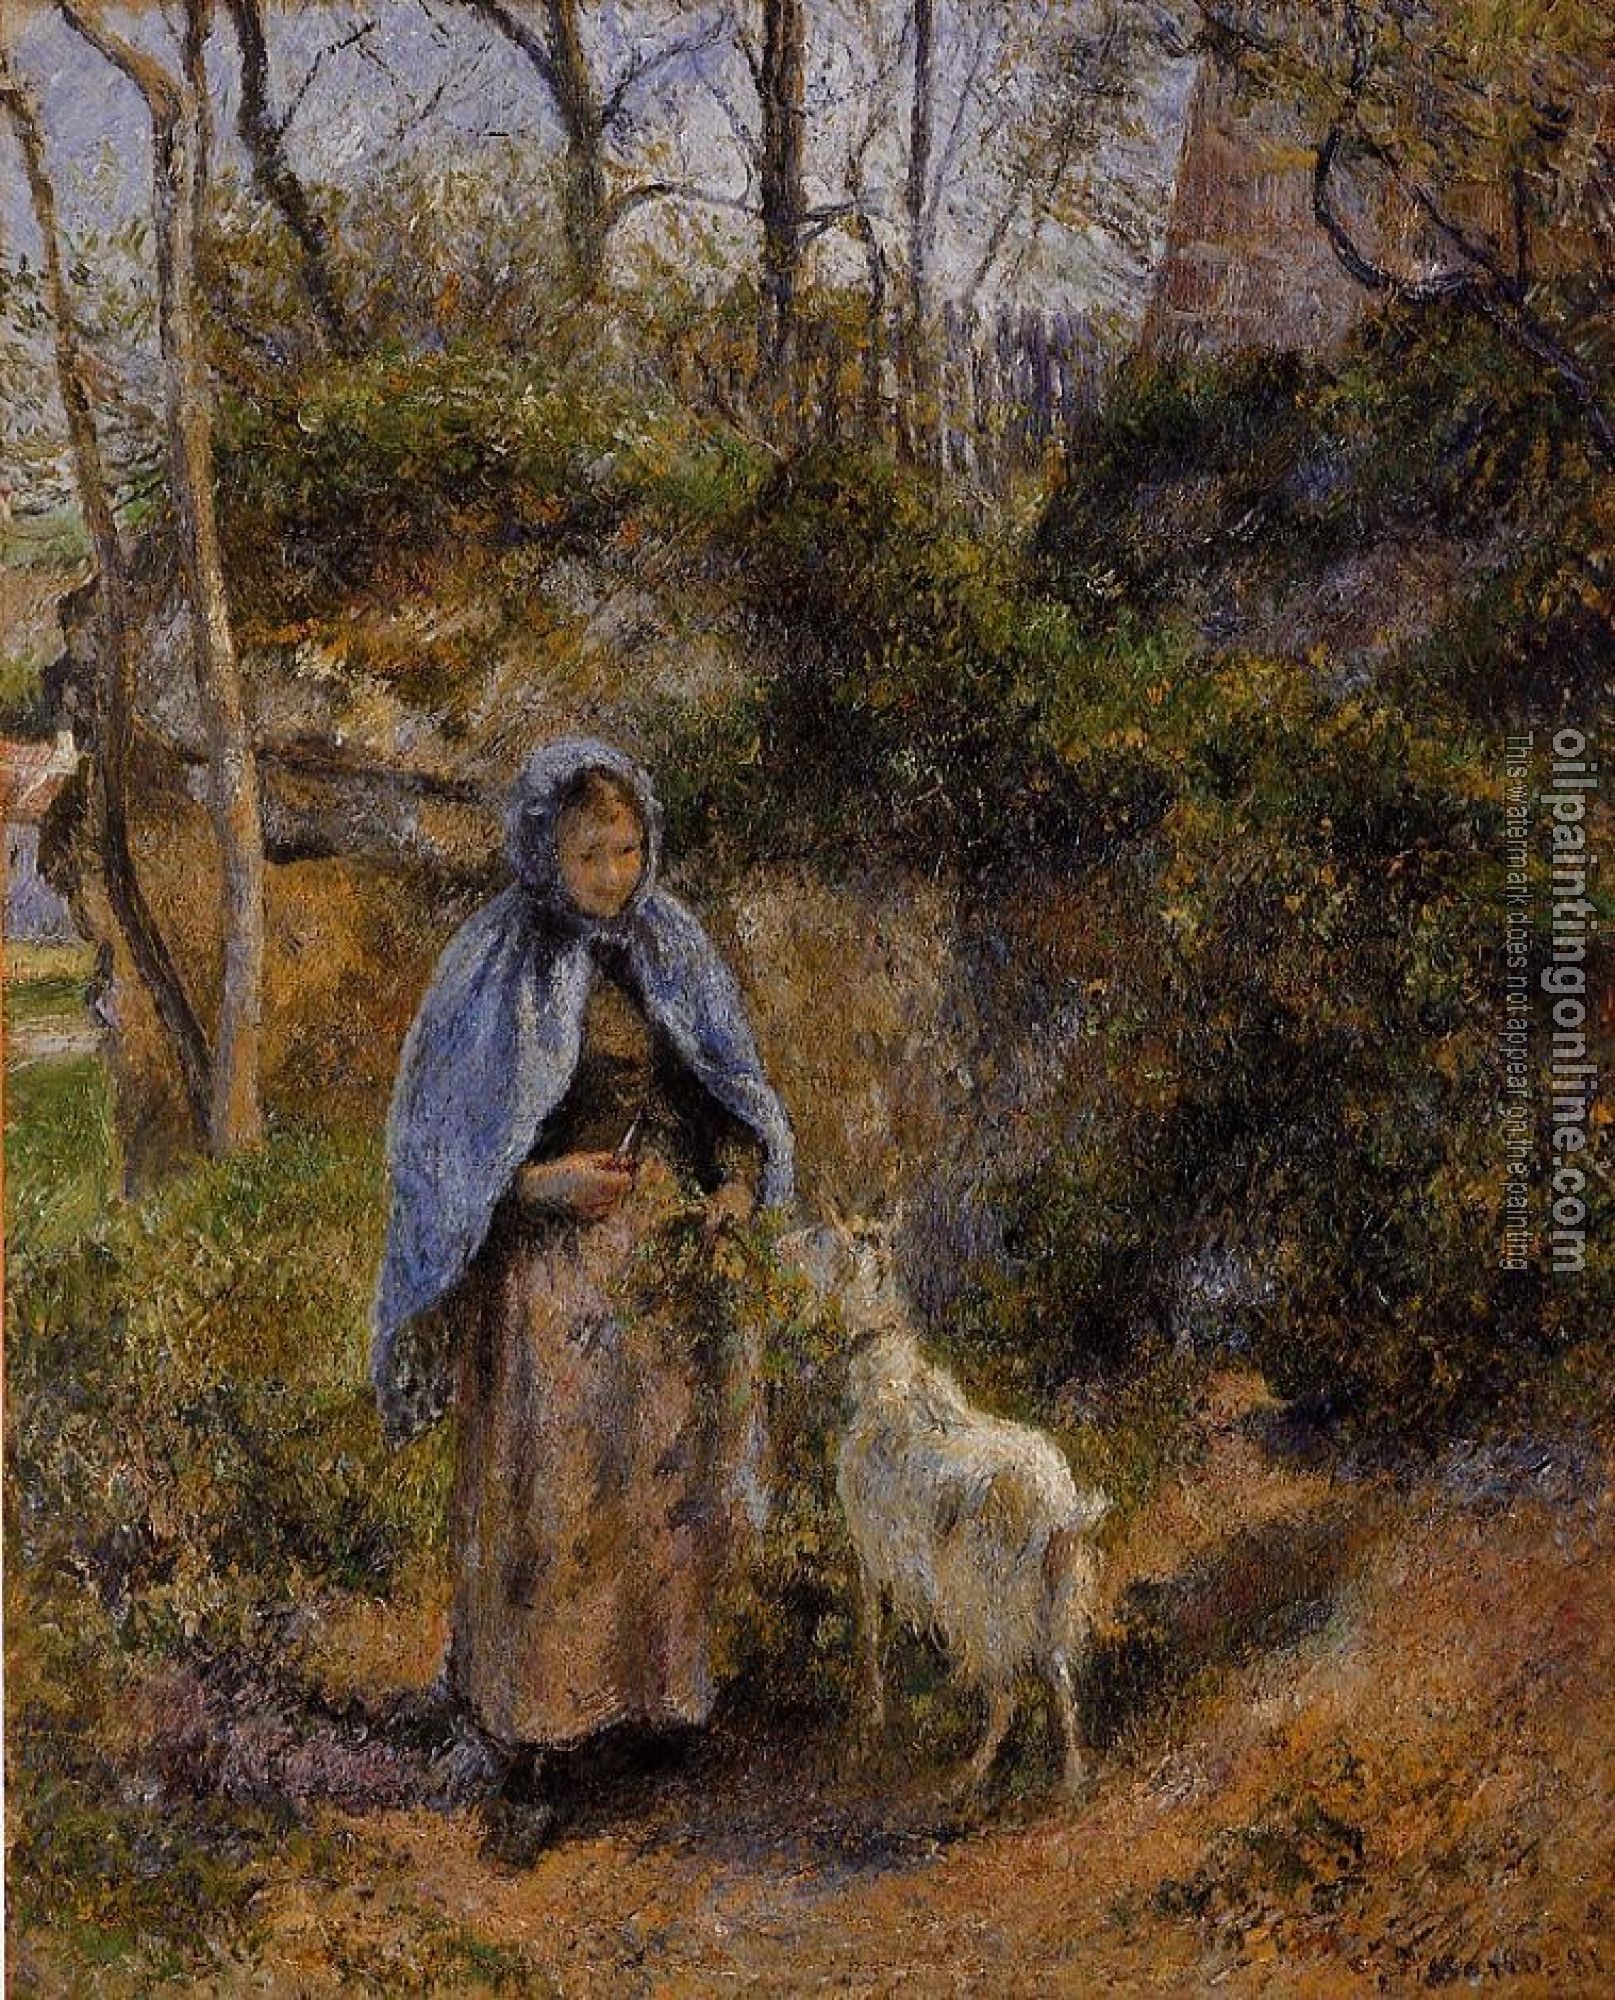 Pissarro, Camille - Peasant Woman with a Goat